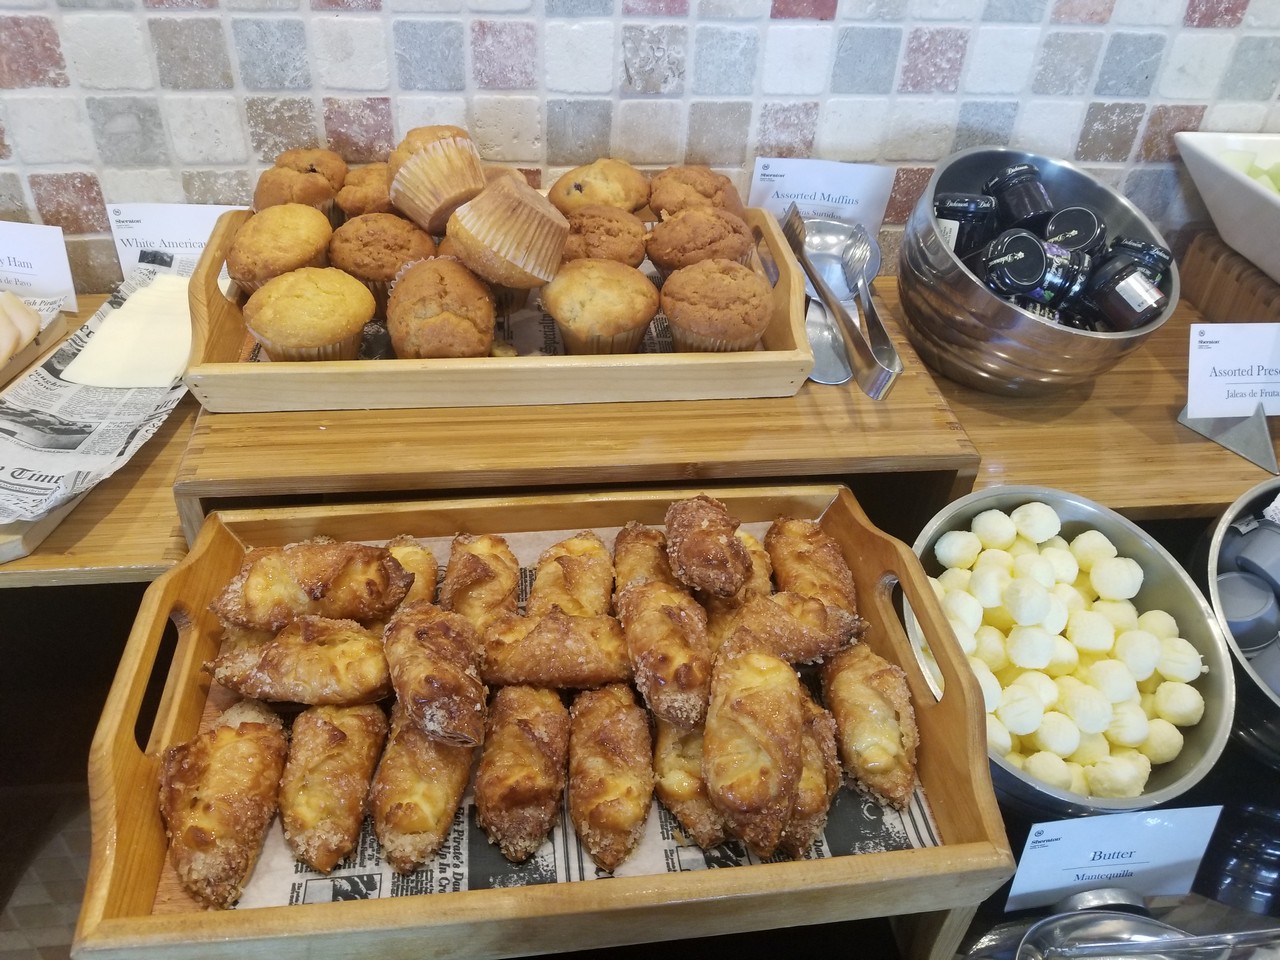 a trays of pastries and muffins